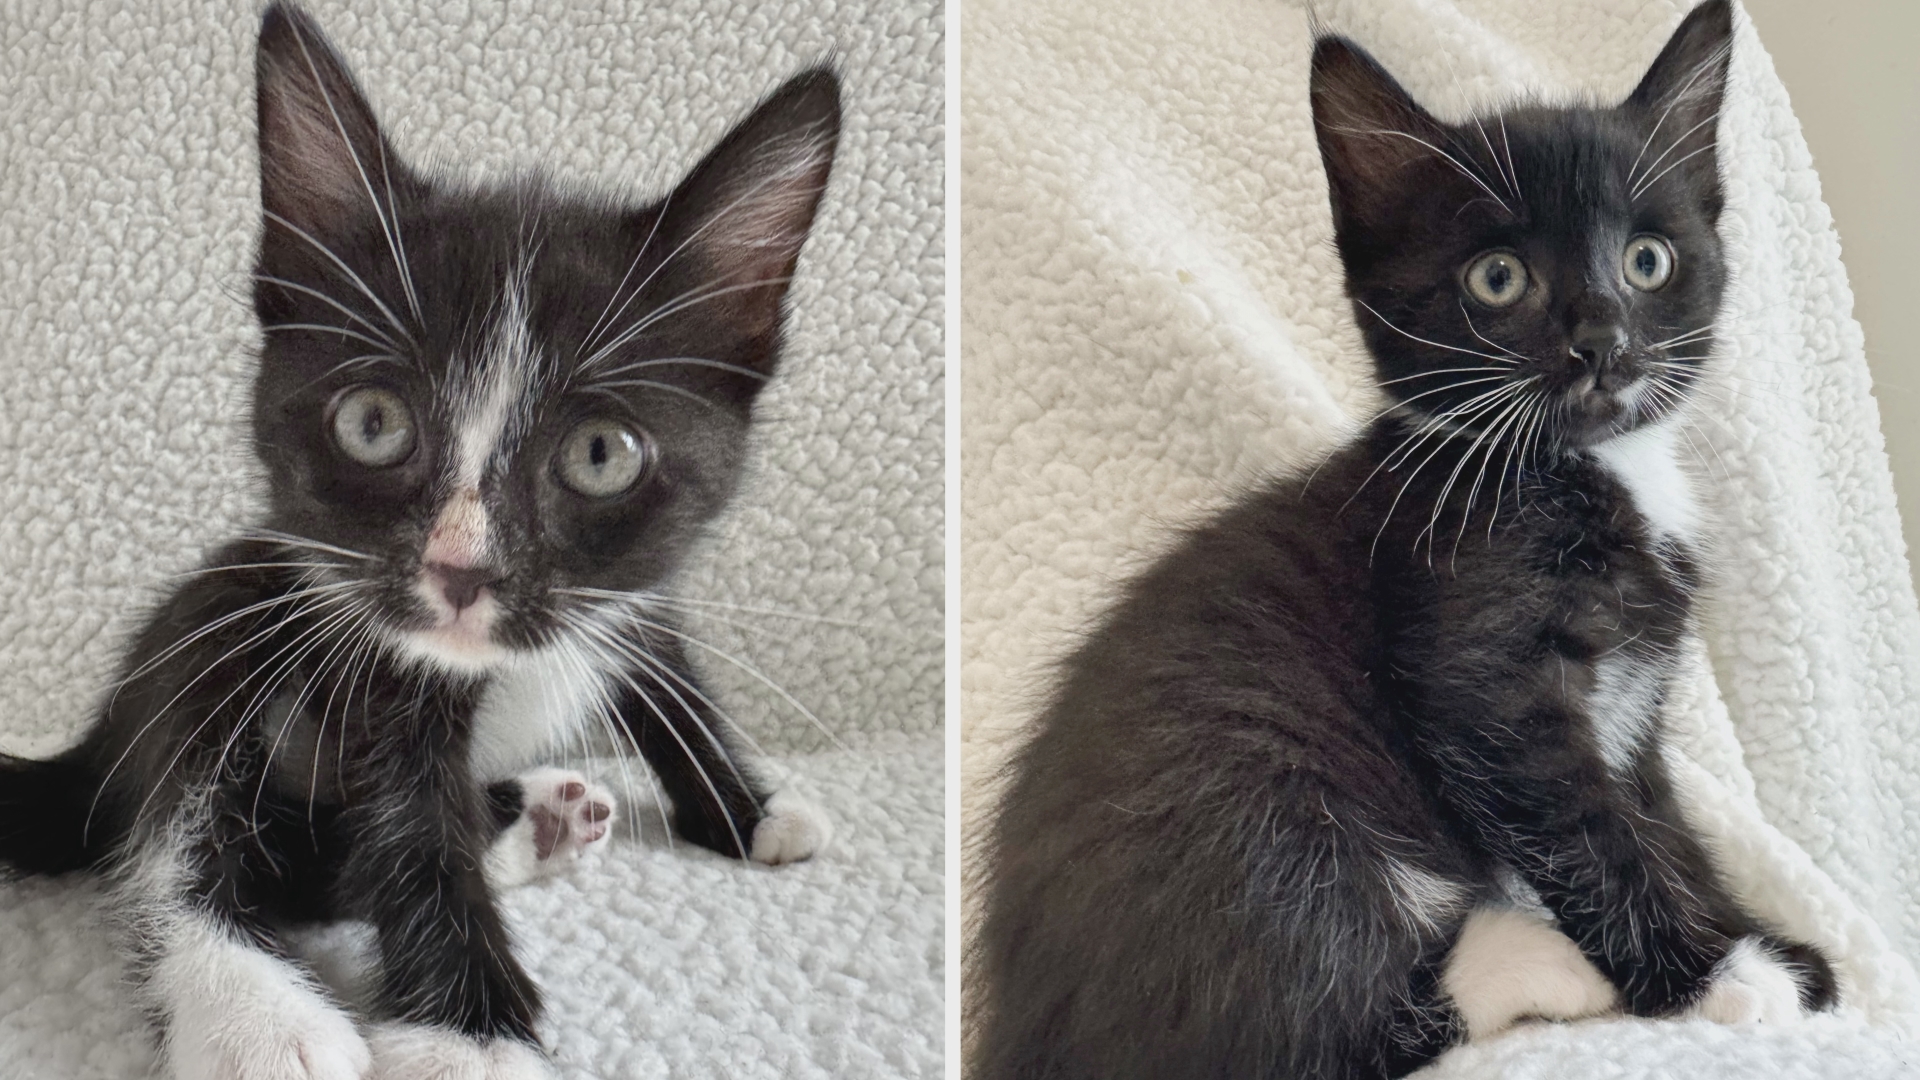 Let's get these two sweet kittens adopted! Piper and Prue are available at Juliet's House Animal Rescue.